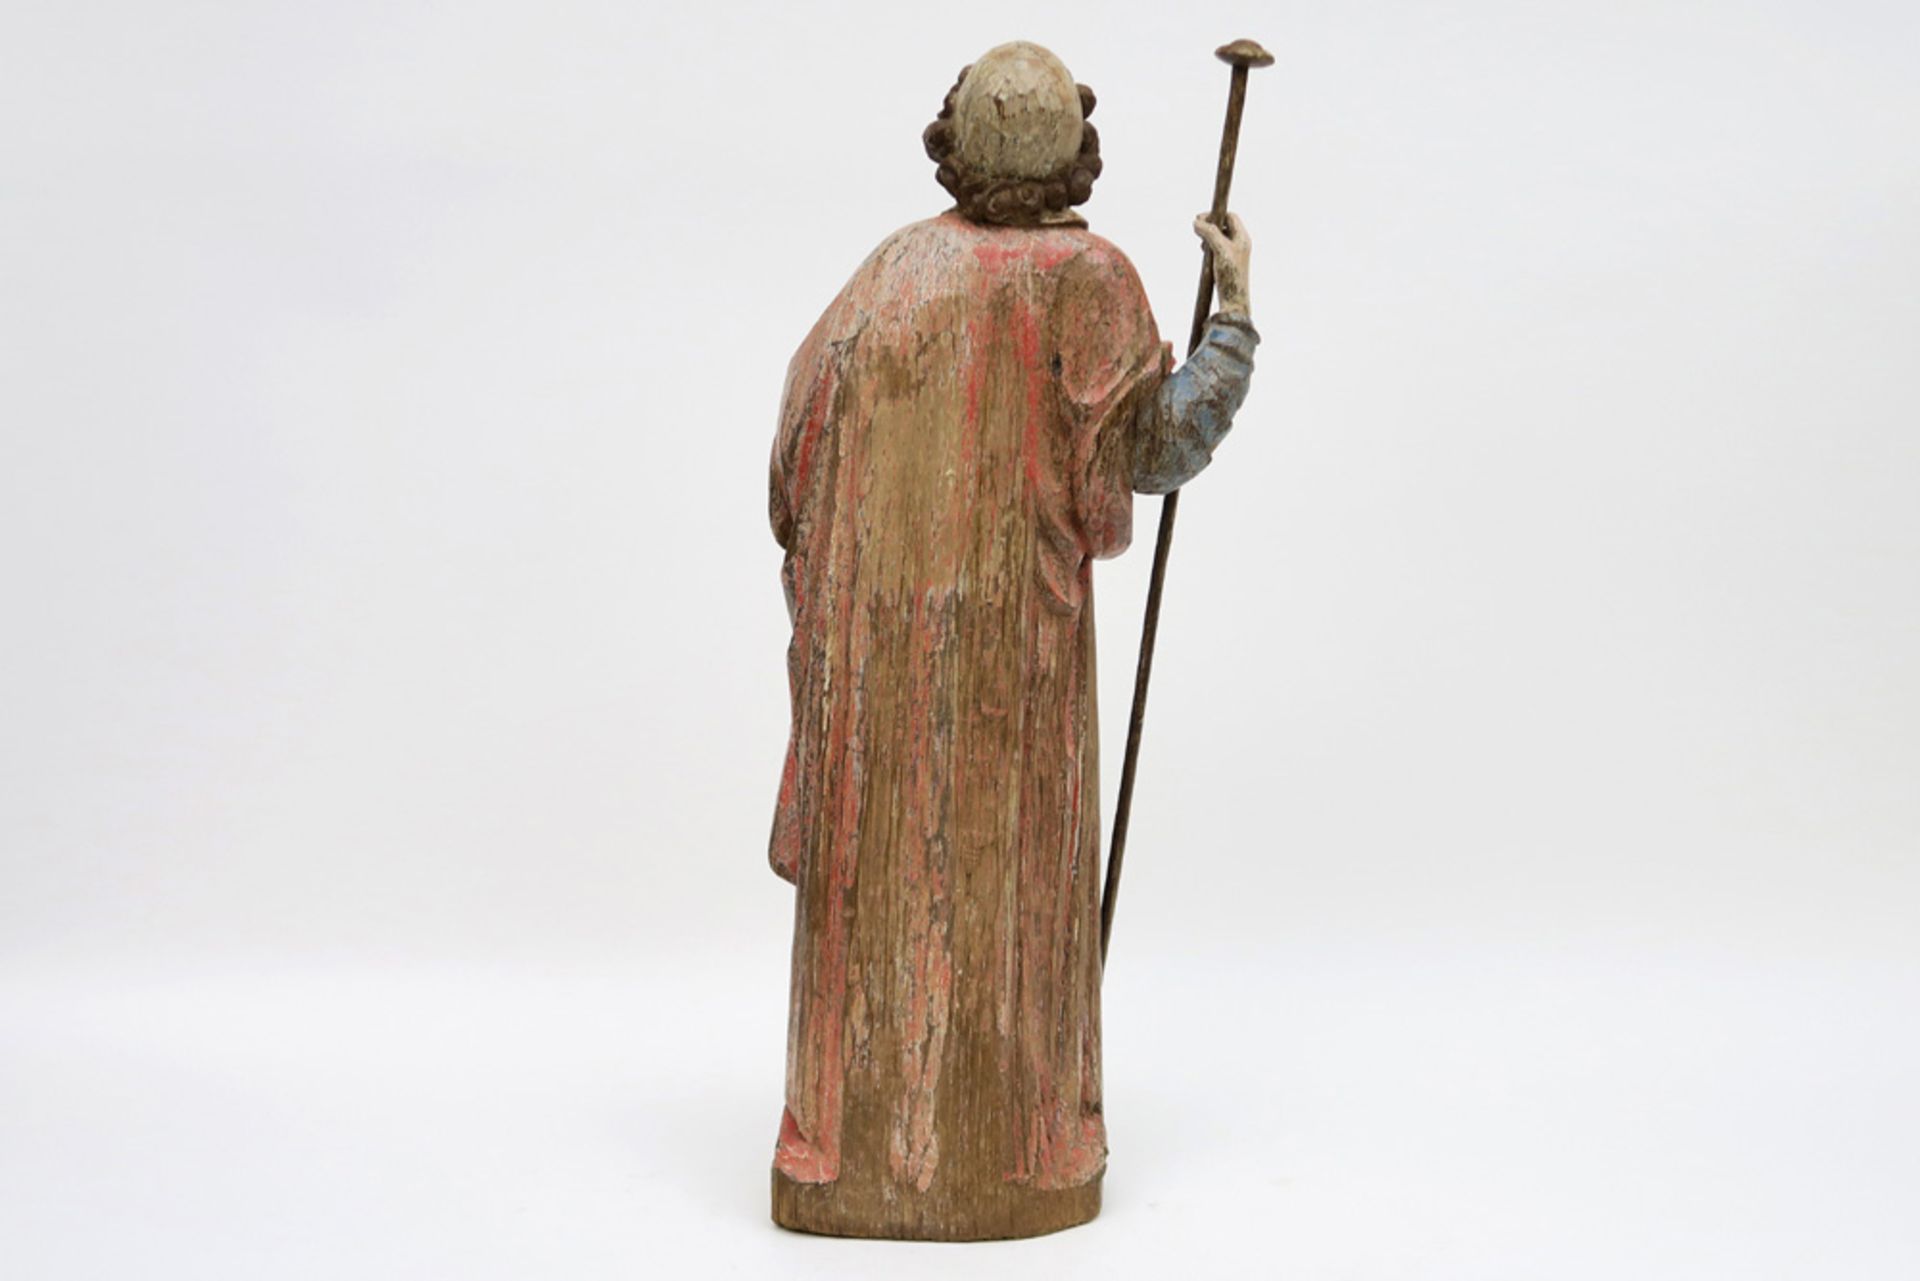 16th Cent. European gothic style "Saint with book" sculpture in polychromed wood || EUROPA - 16° - Image 2 of 4